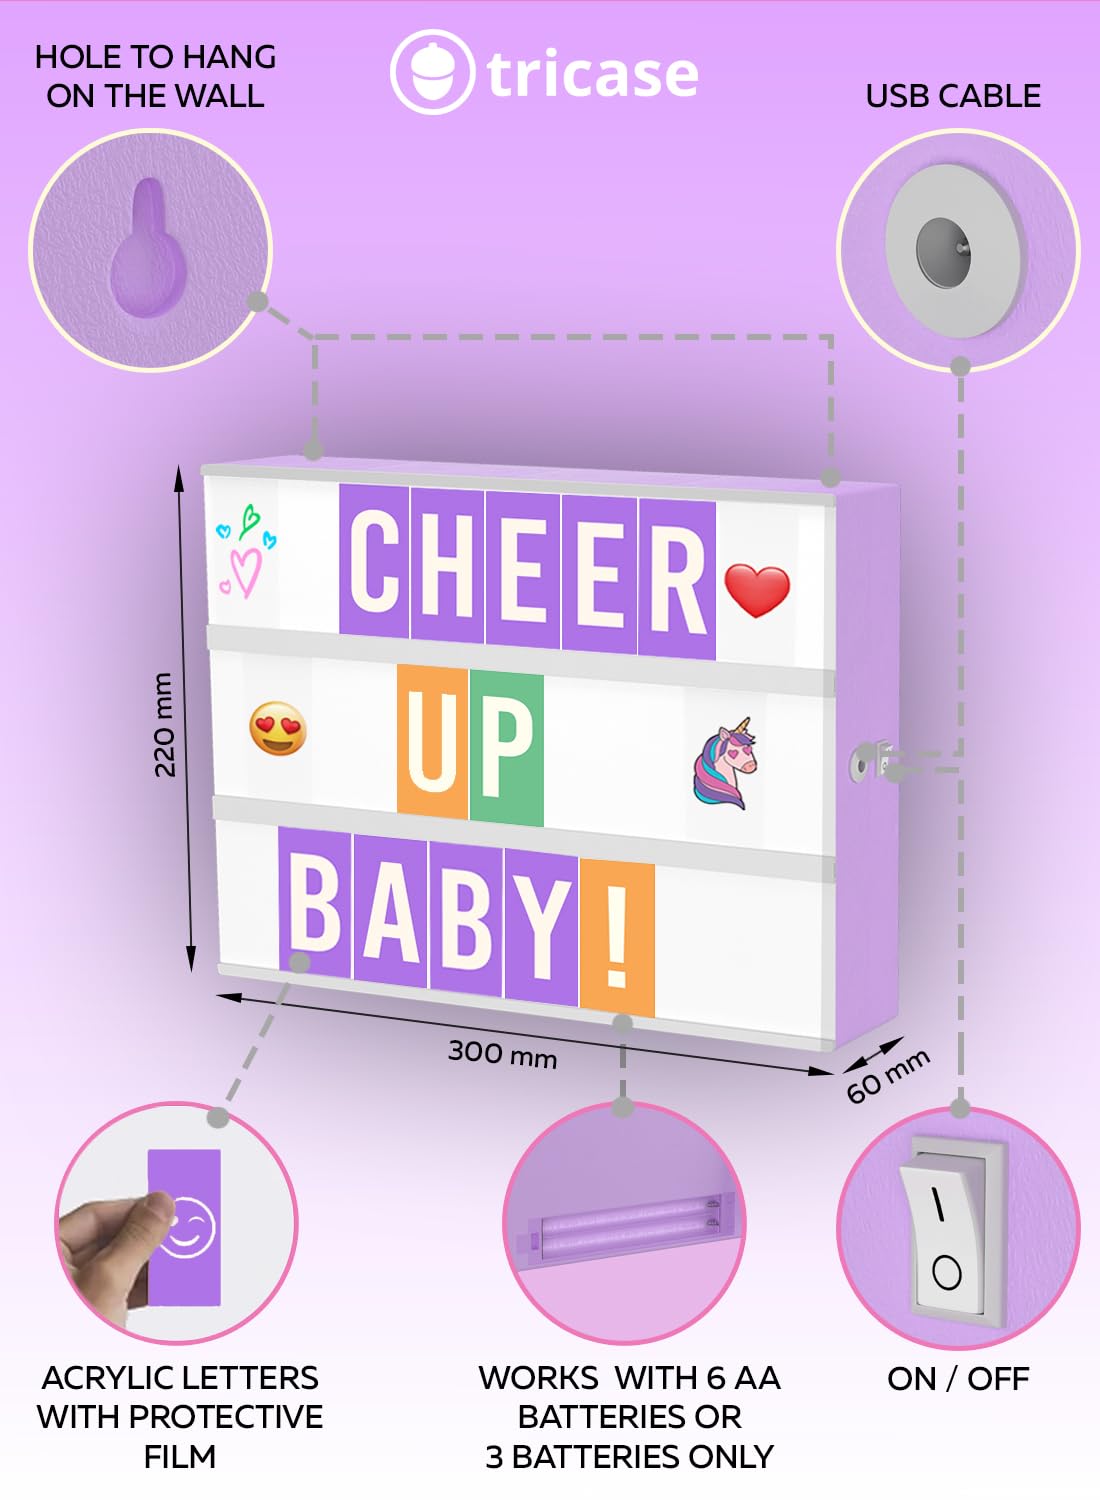 Purple Cinema Light Box with 312 Letters, Emojis & 3 Markers - Led Light Box sign for Home & Purple Bedroom Decor for Girls - Light Up Letter Board - Best Gift Idea for Girls on Christmas or Birthday  - Like New